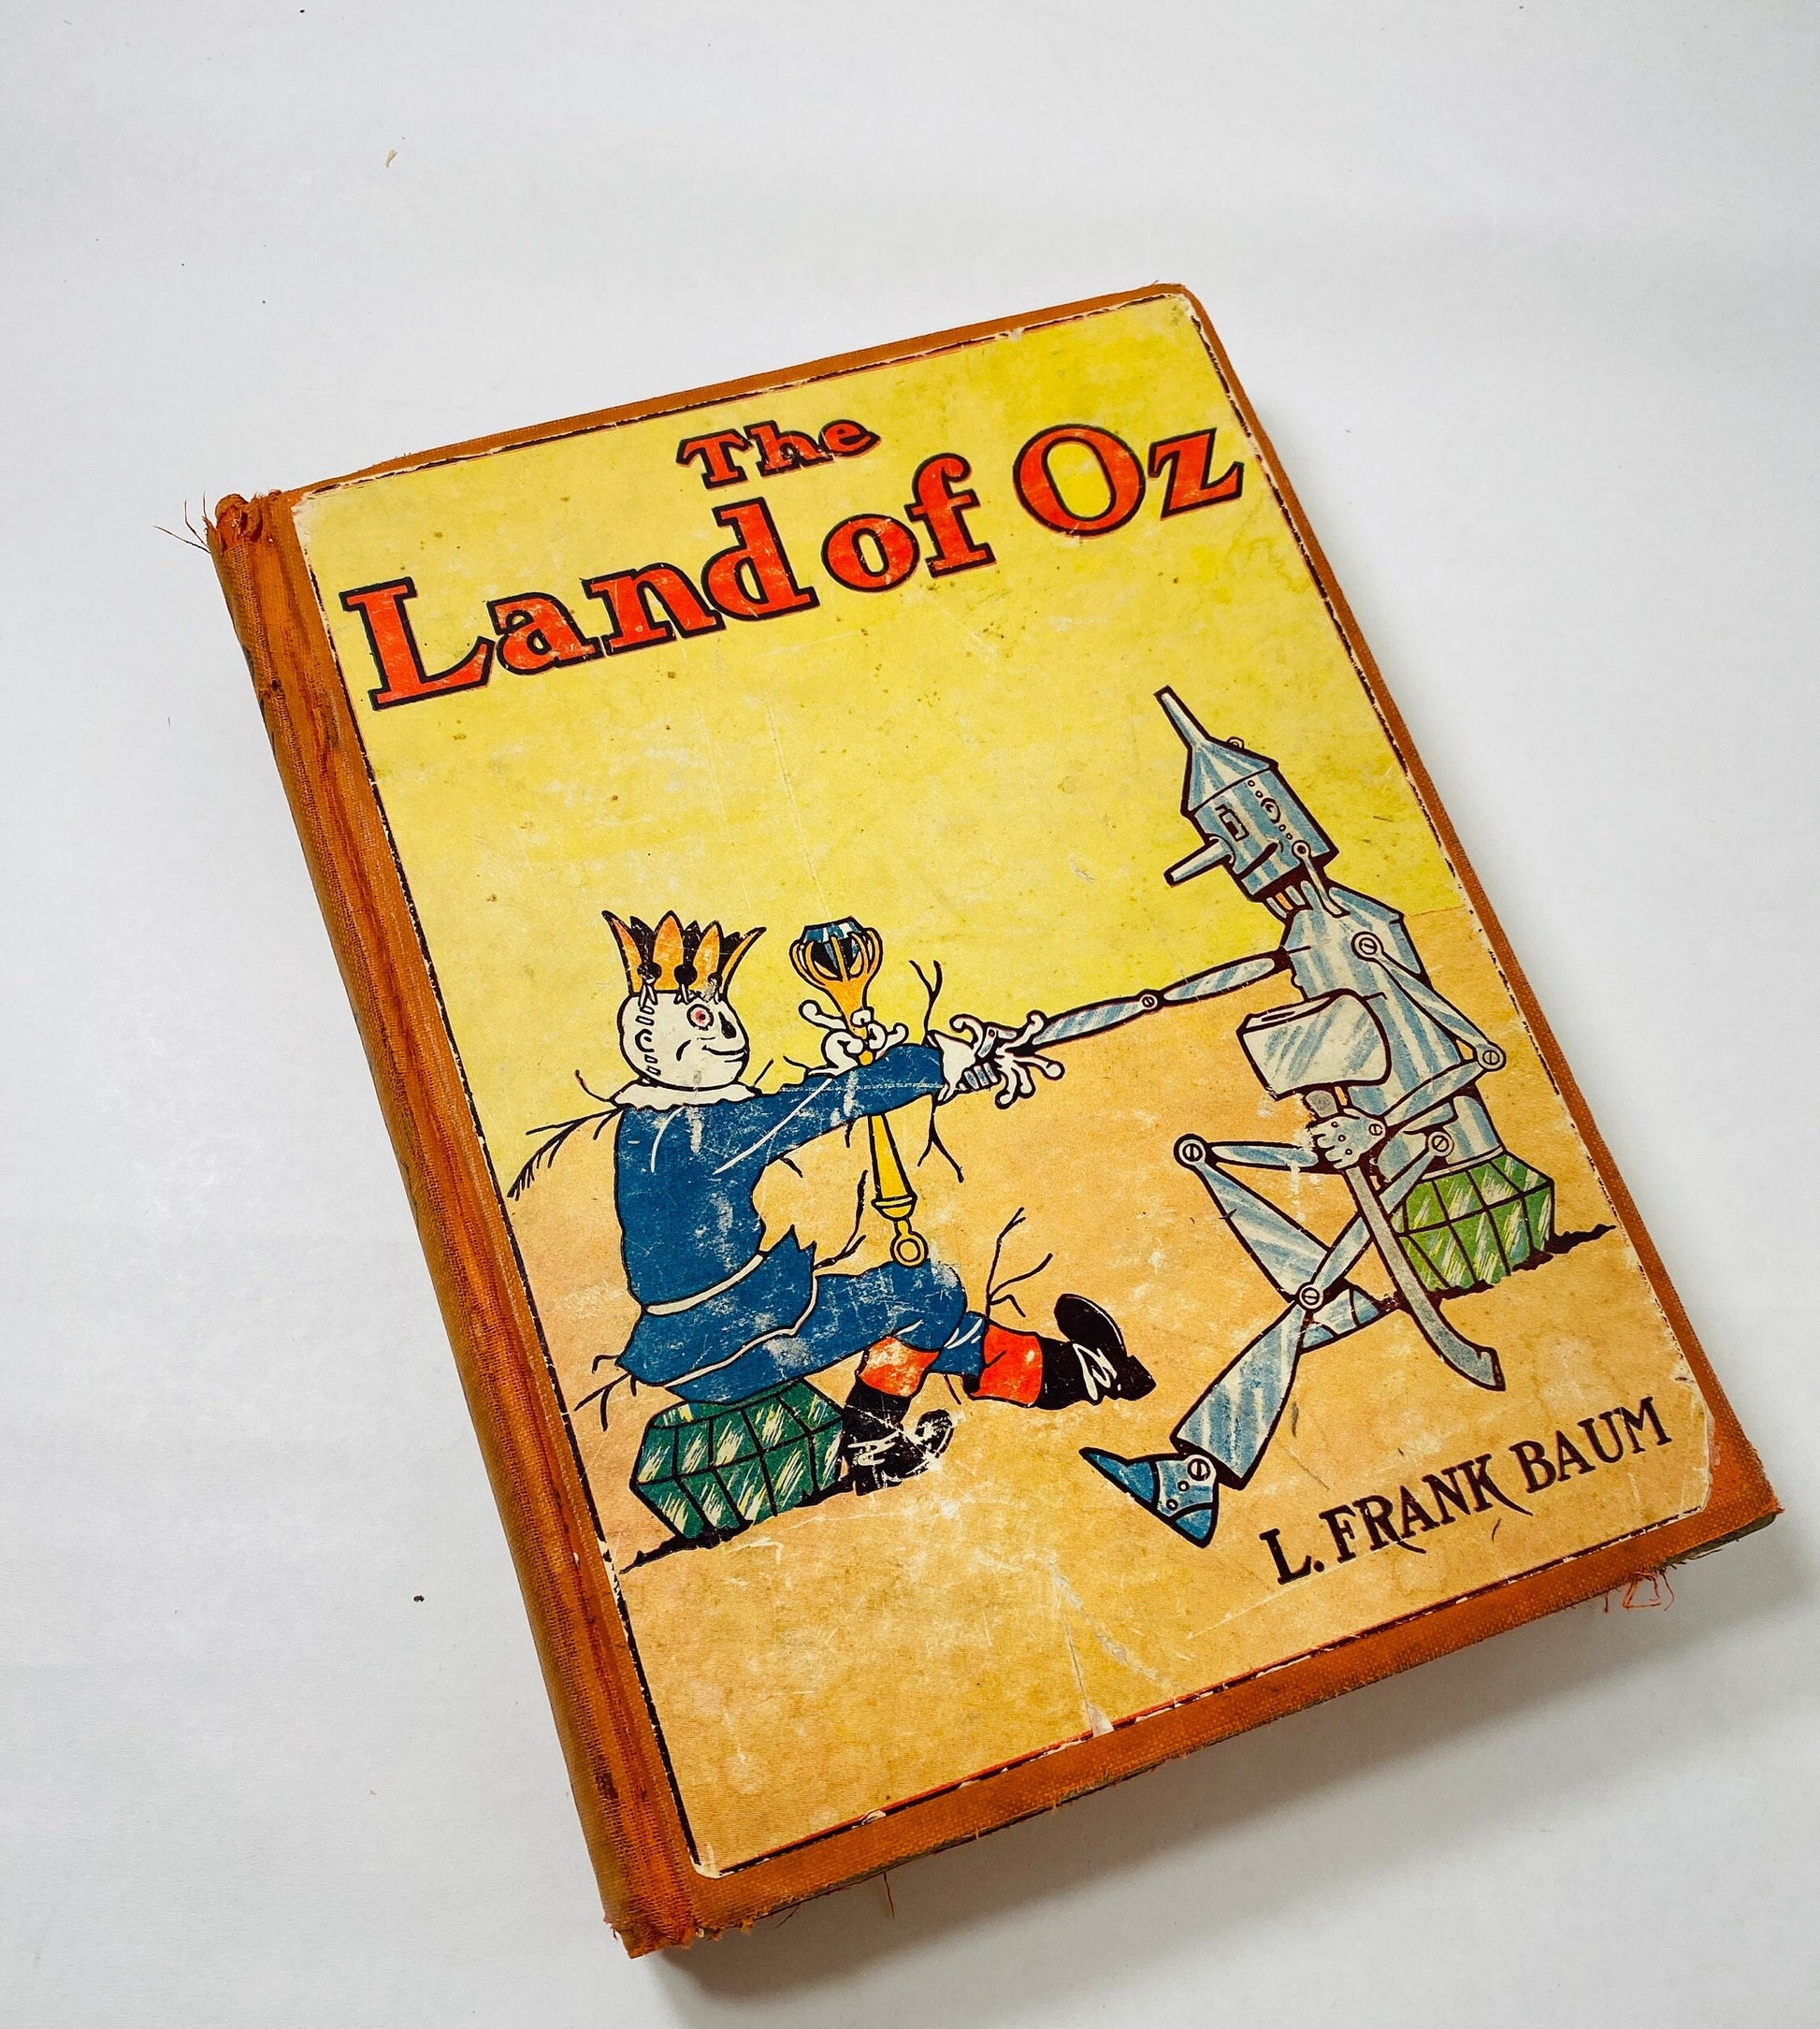 Land of Oz by Frank Baum vintage book circa 1939 Magical tale of adventure and love in the Land of Oz. Reilly & Lee Co. John R Neill